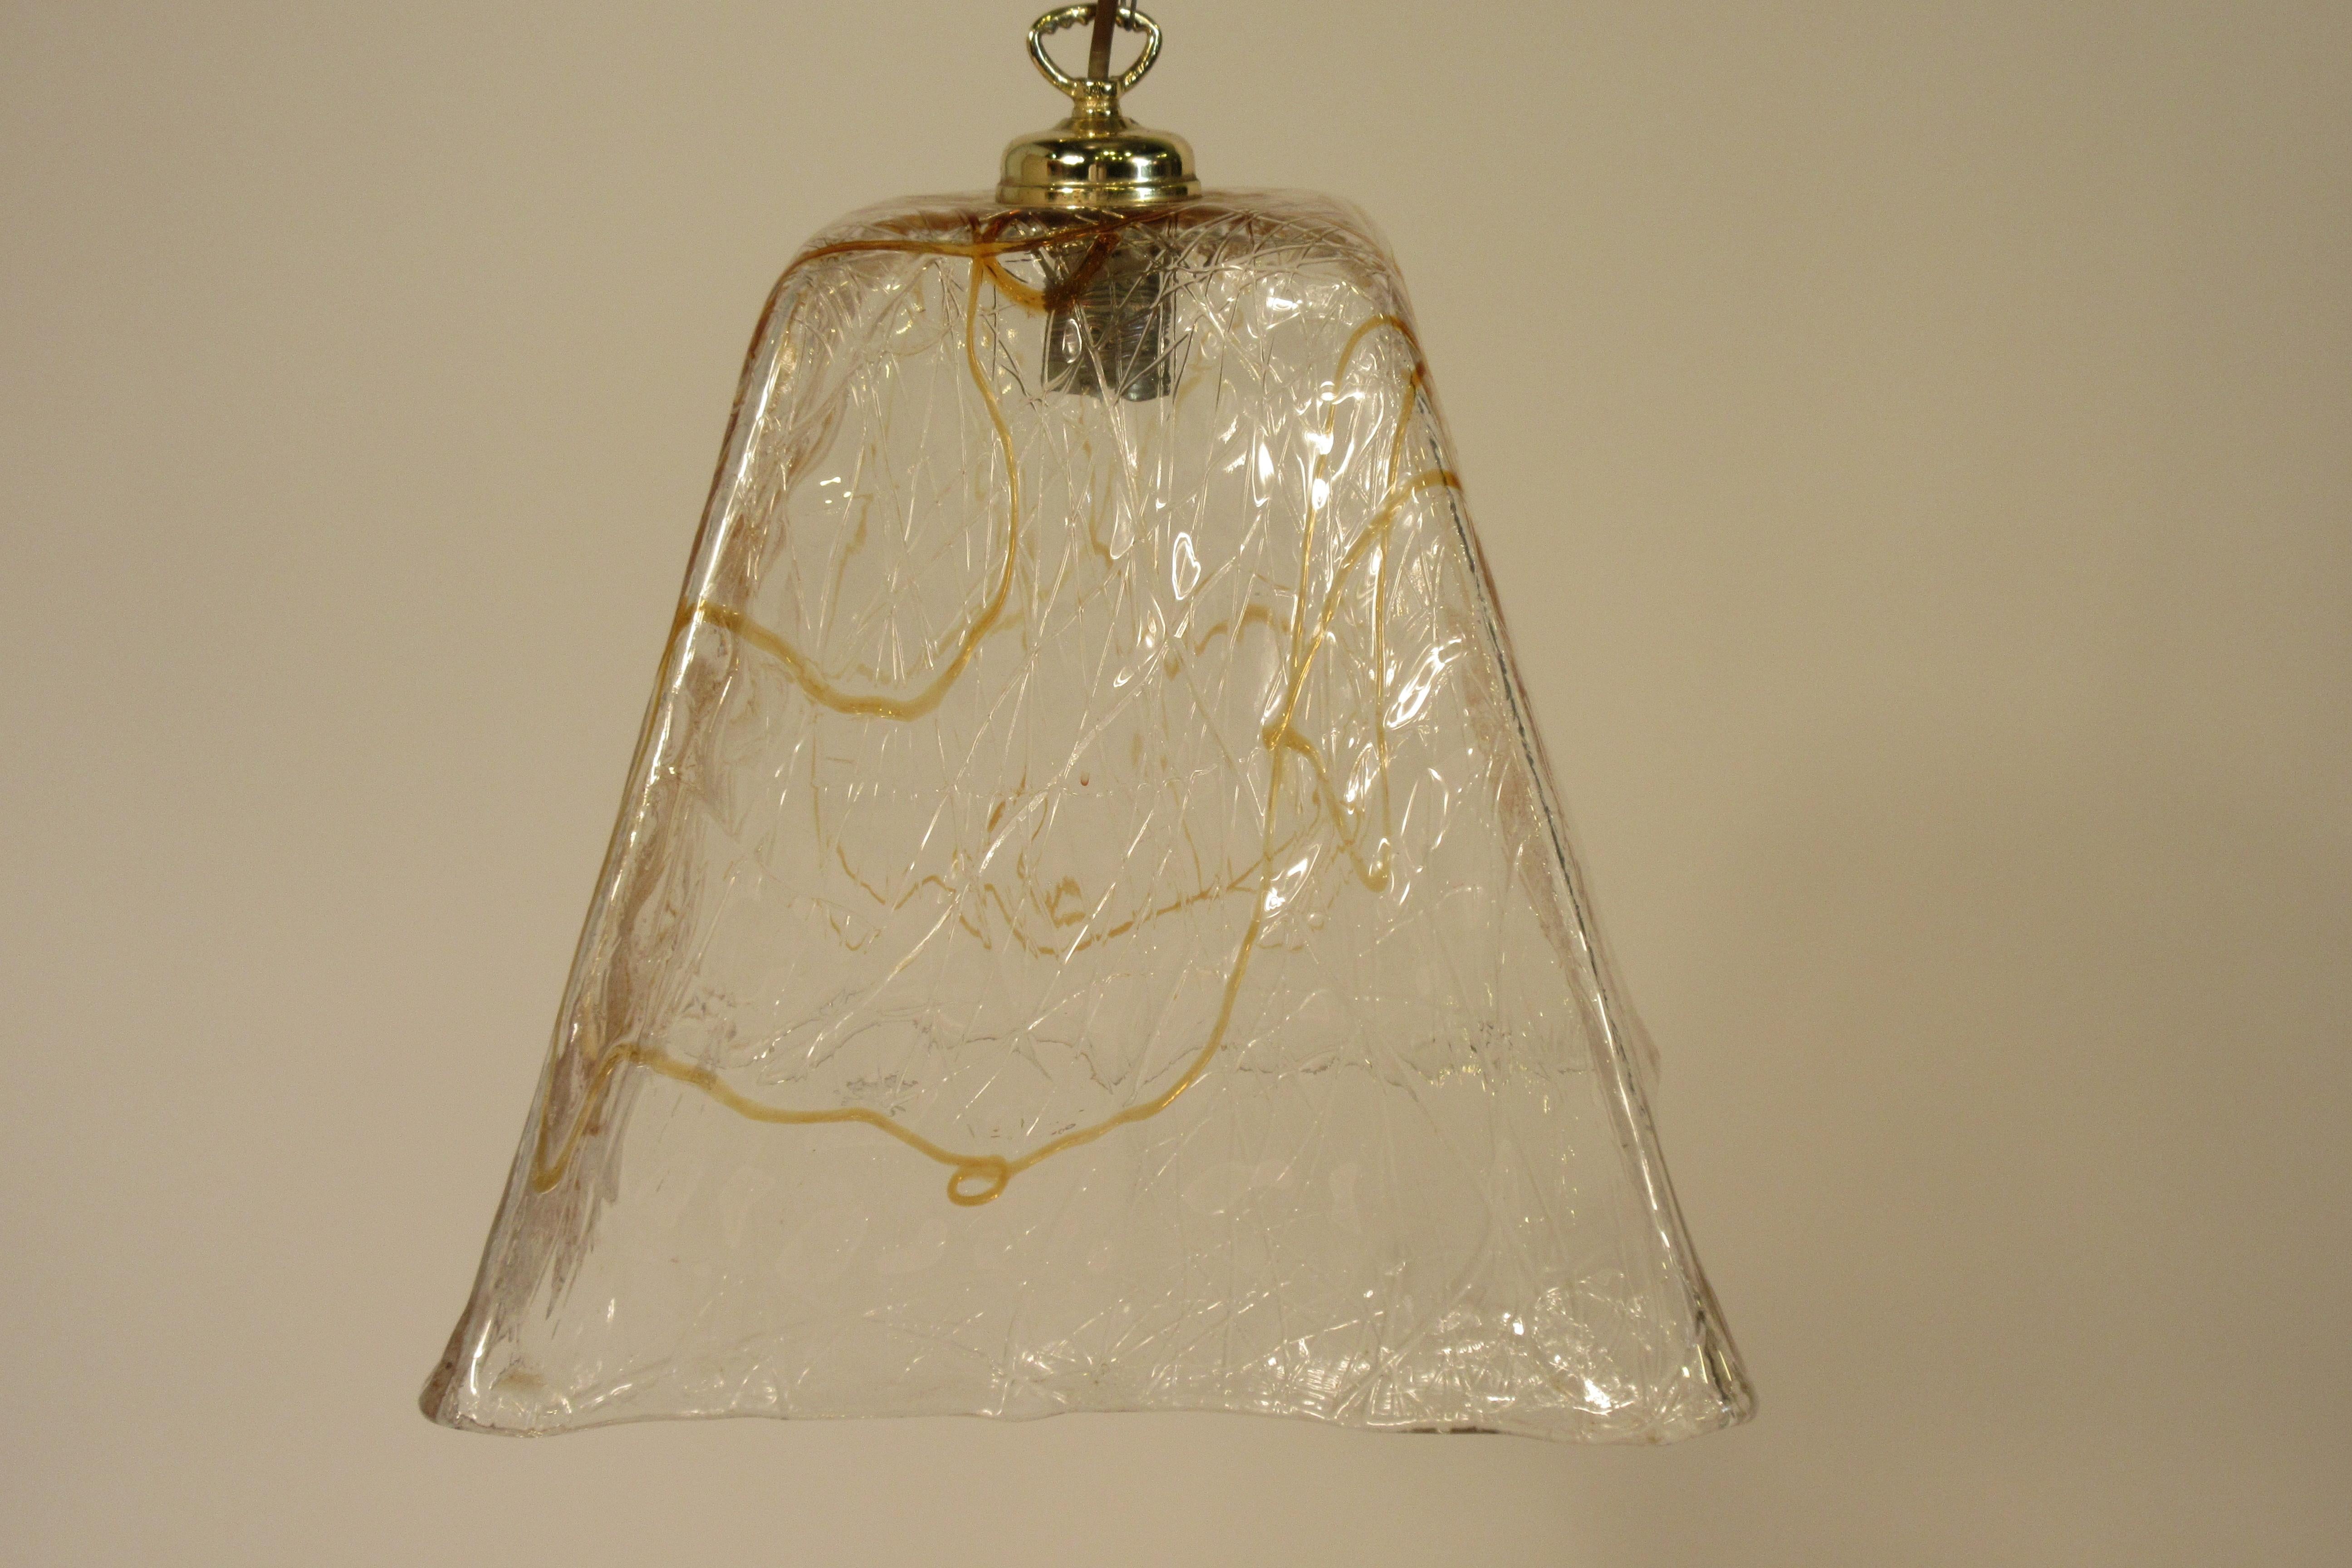 1970s Italian icicle glass fixture with amber streaks.